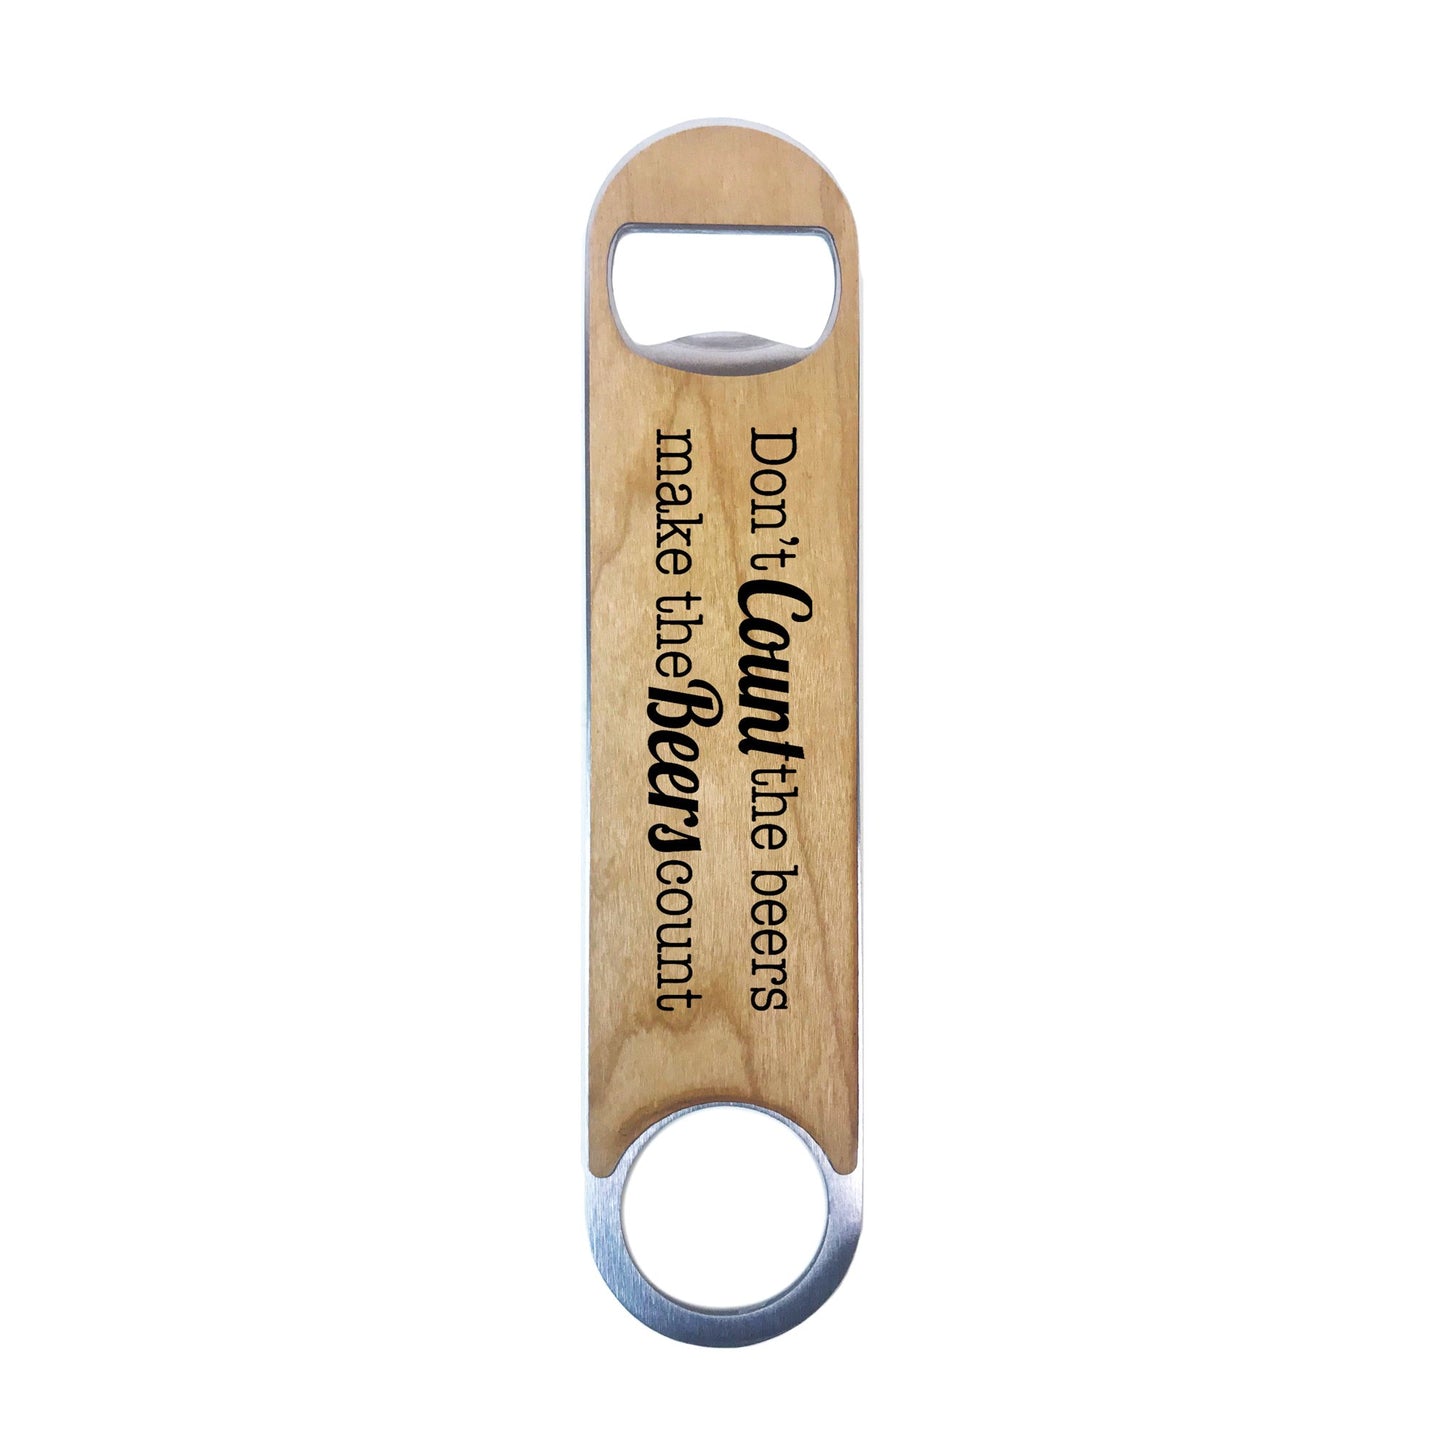 Make The Beers Count - Magnetic Bottle Opener